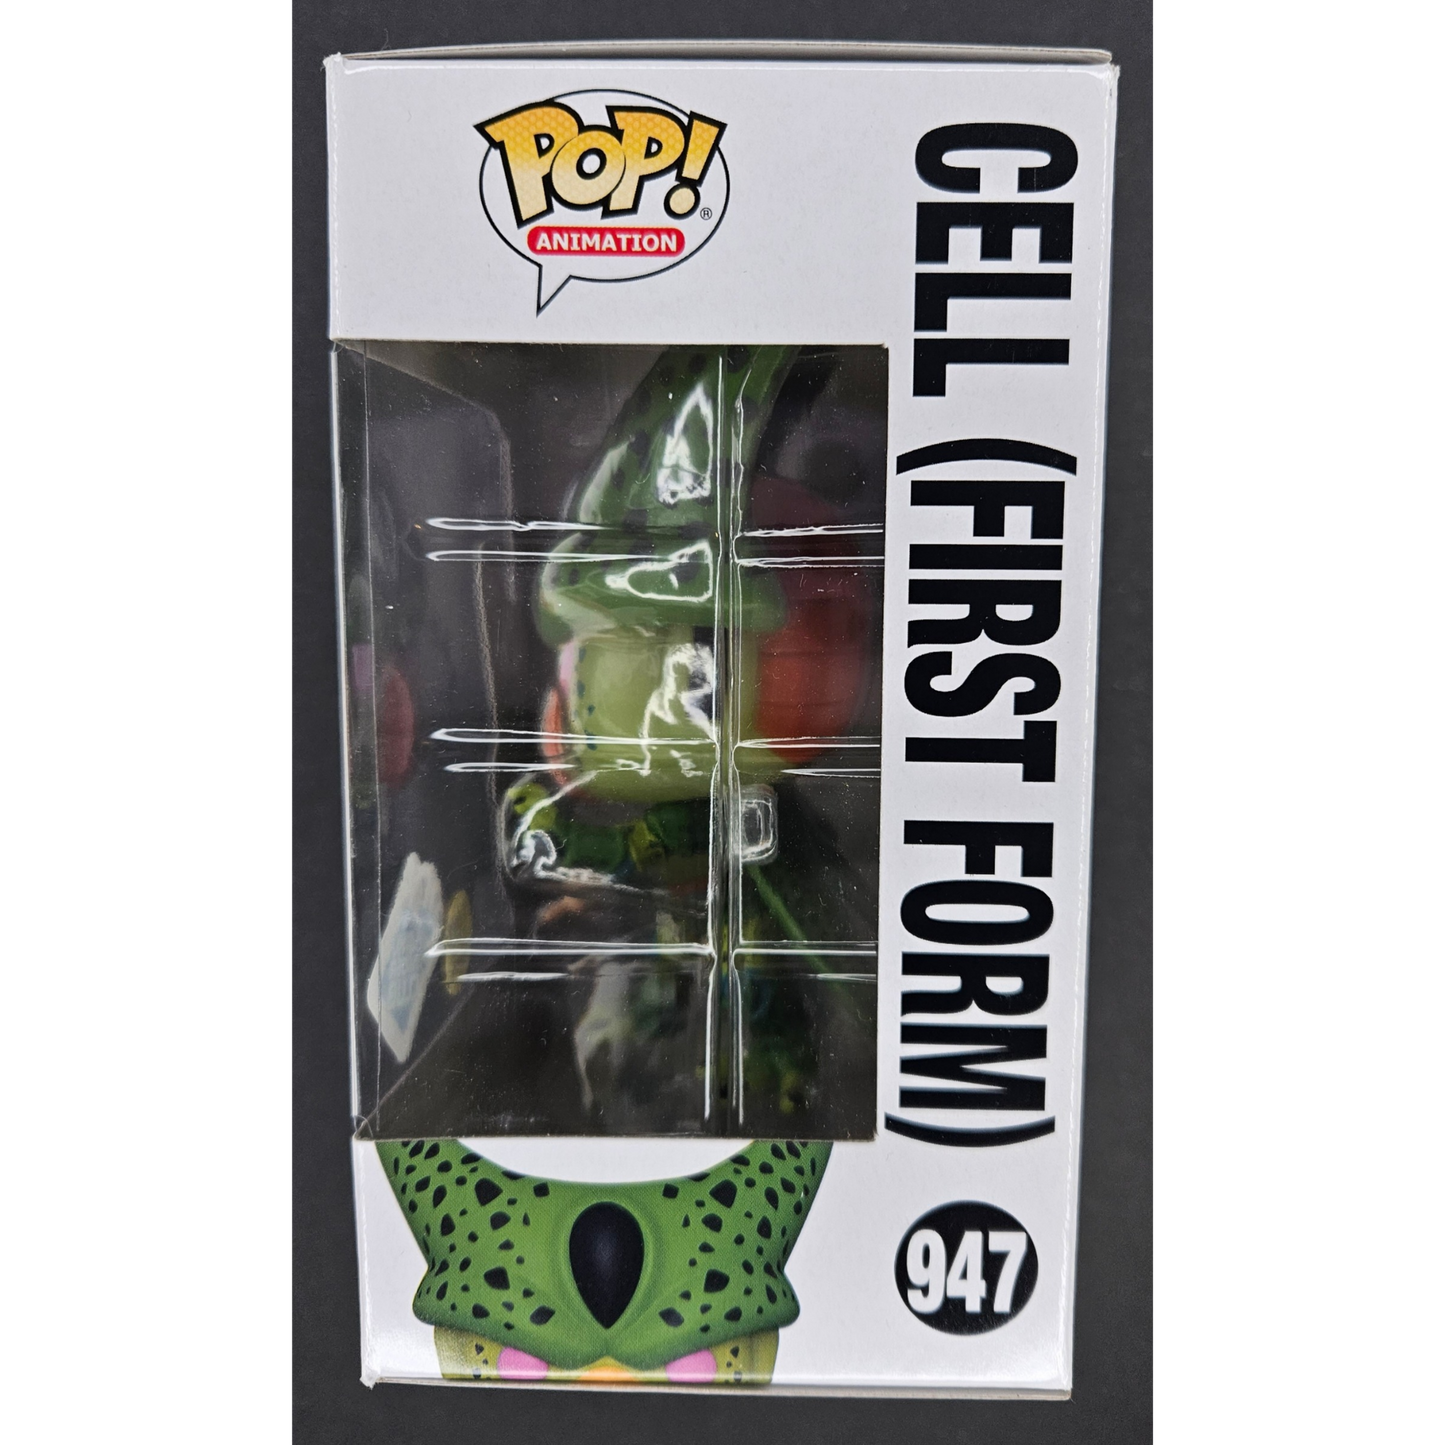 Cell (First Form) Funko Pop! DragonBall Z Animation #947 Glows in the Dark